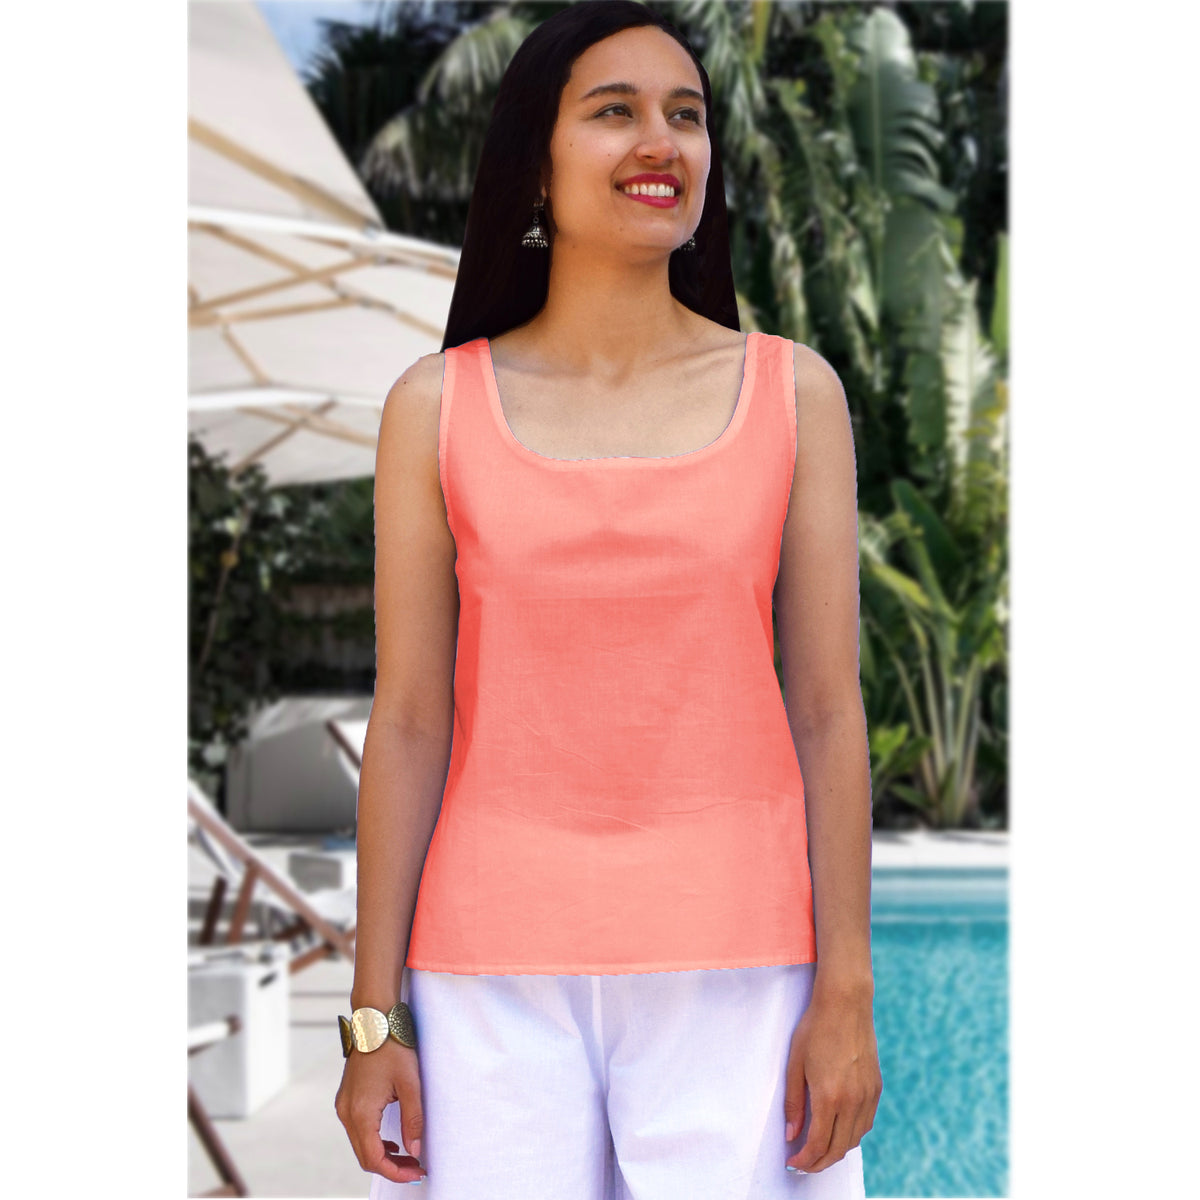 Women's Basic Short Cotton Camisoles ( Additional colors): Made to